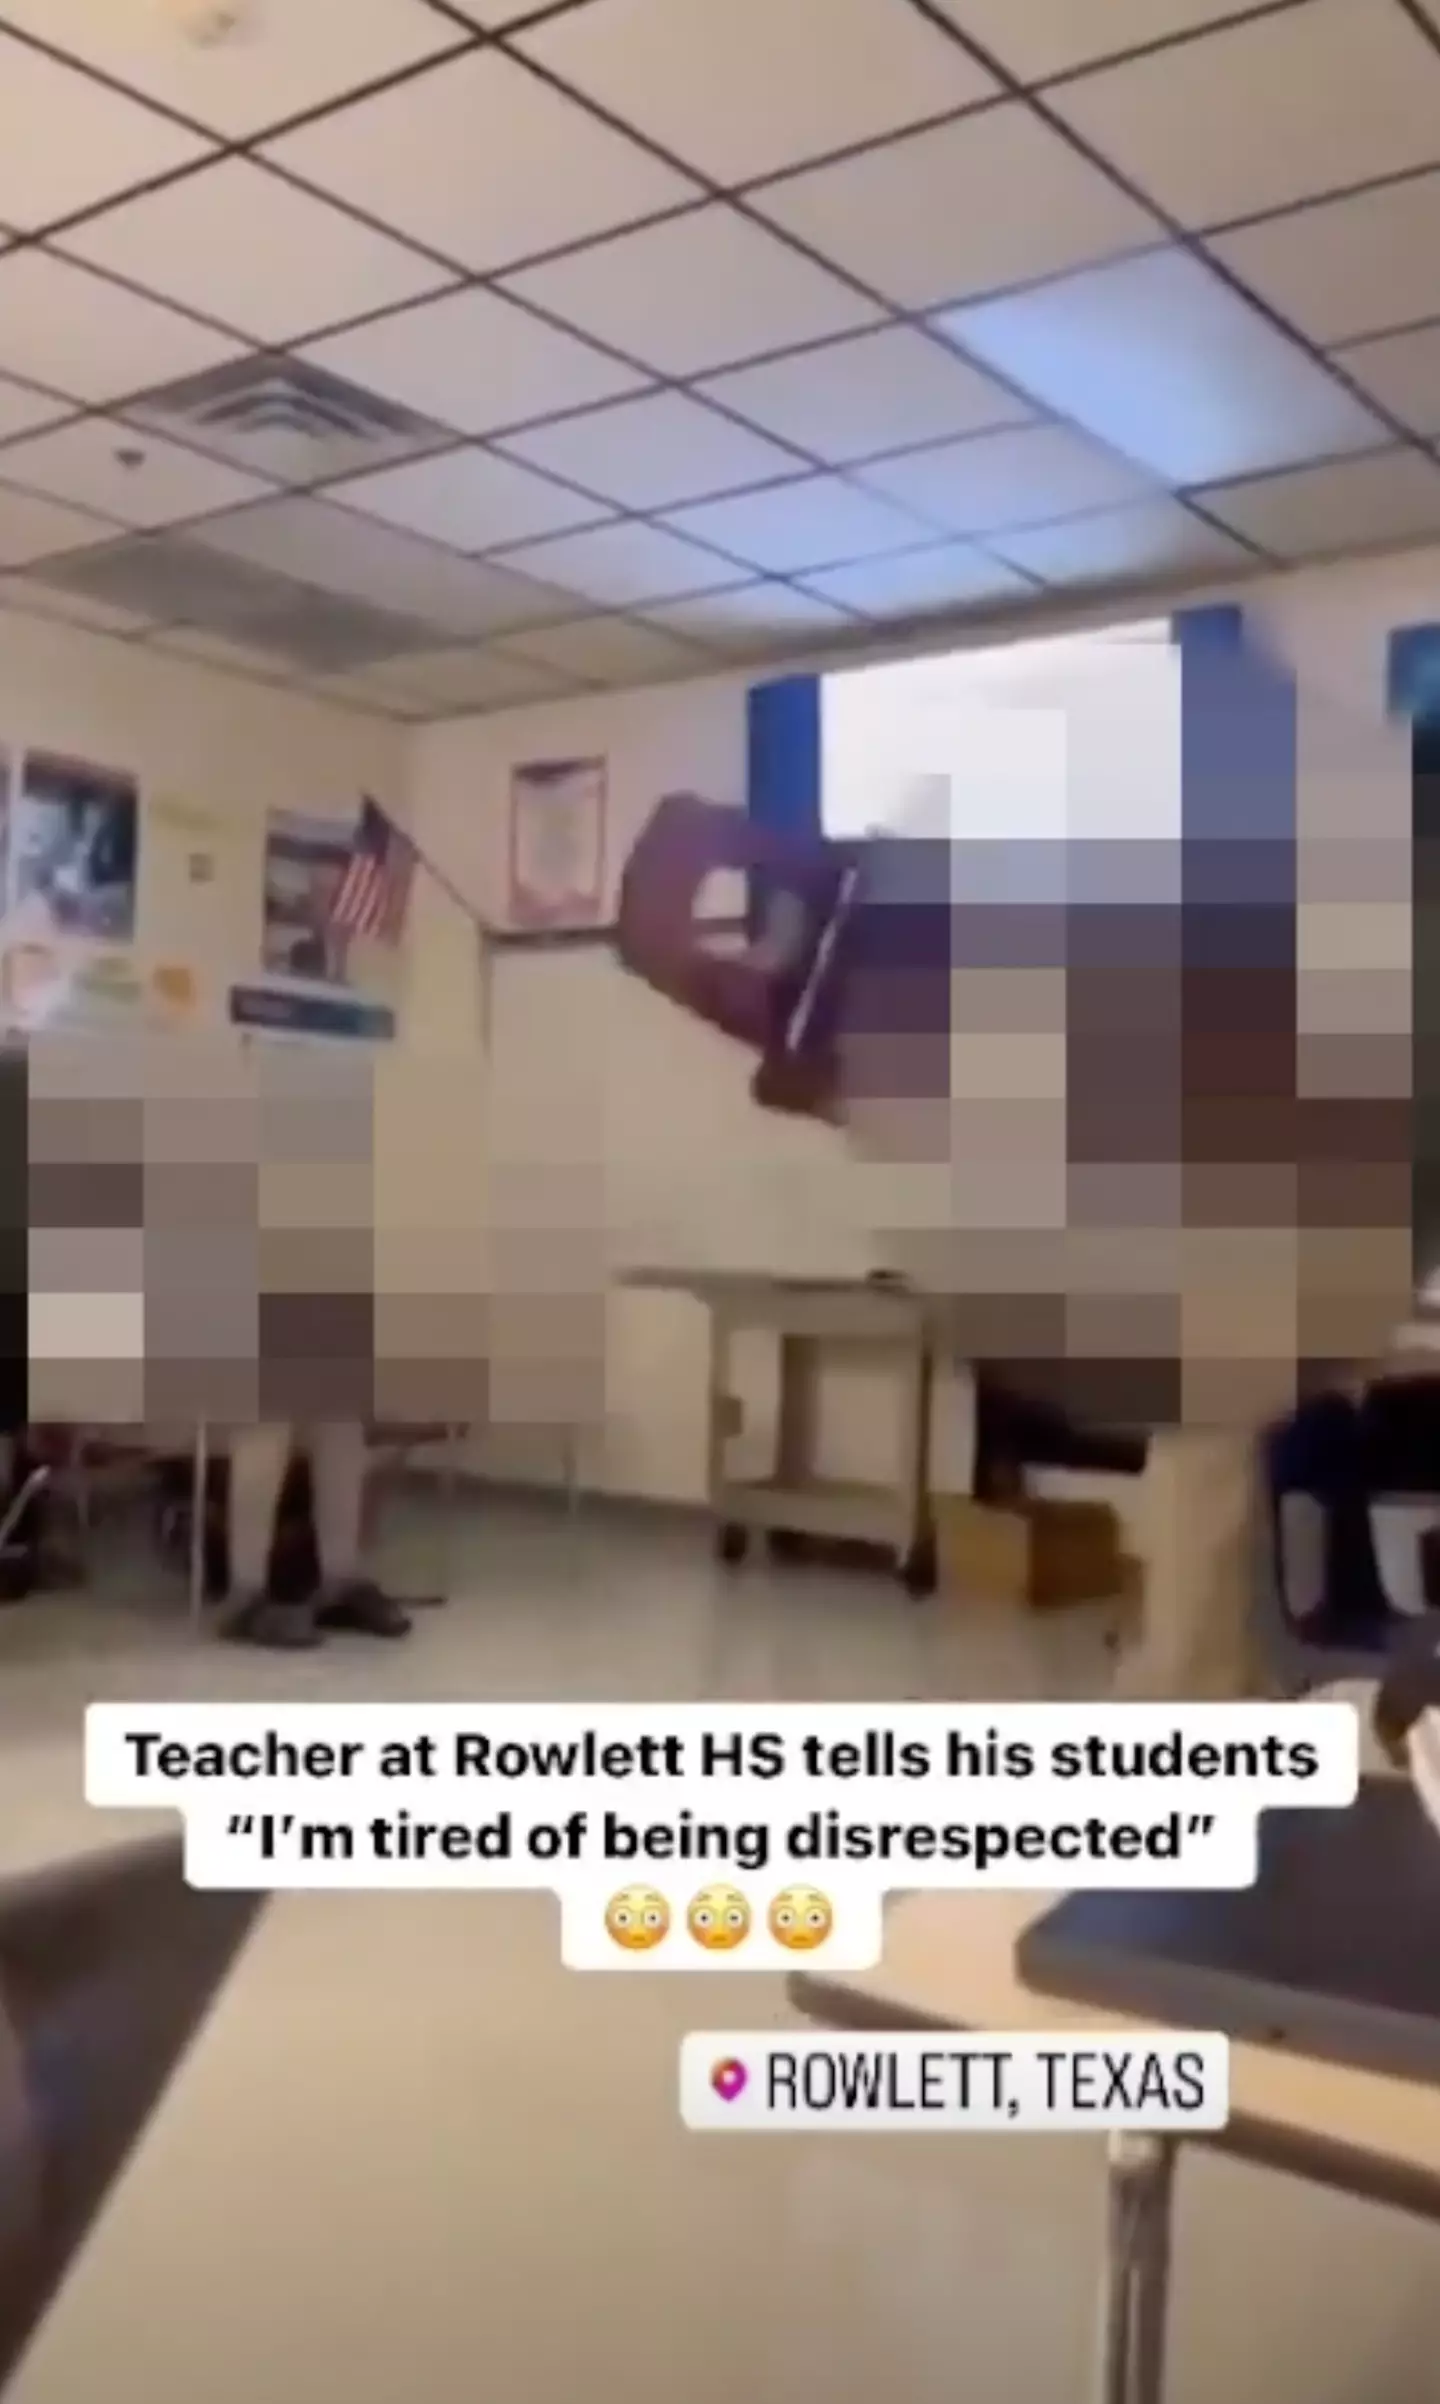 Many former students have taken to social media to defend the teacher.